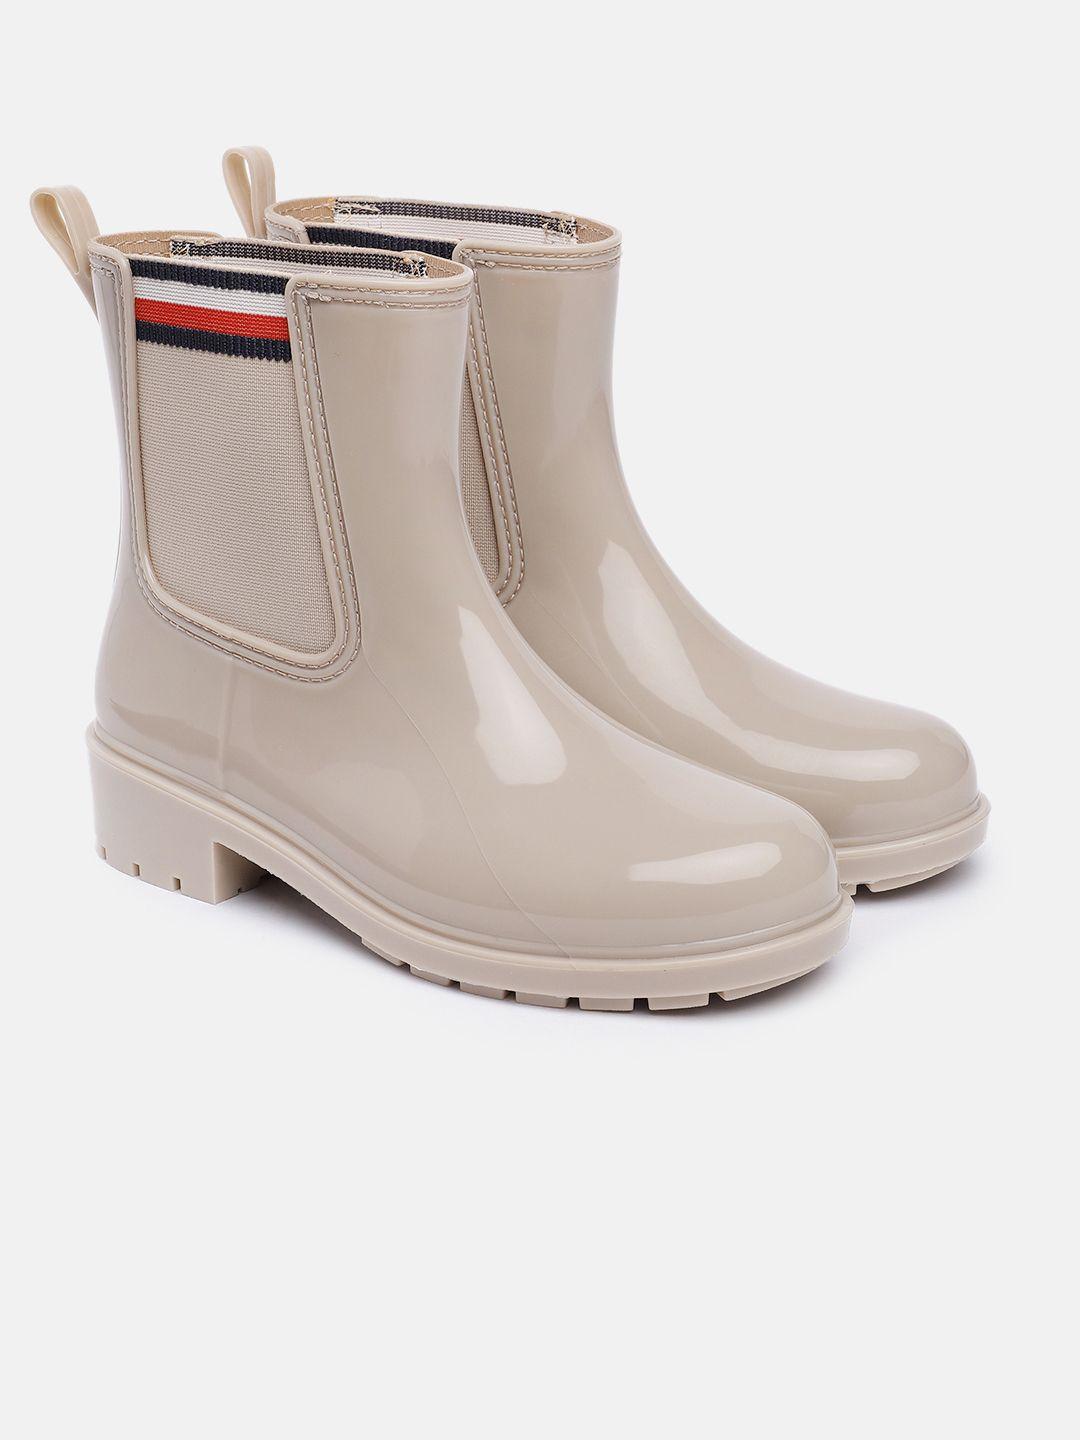 tommy-hilfiger-women-corporate-elastic-solid-high-top-rain-boots